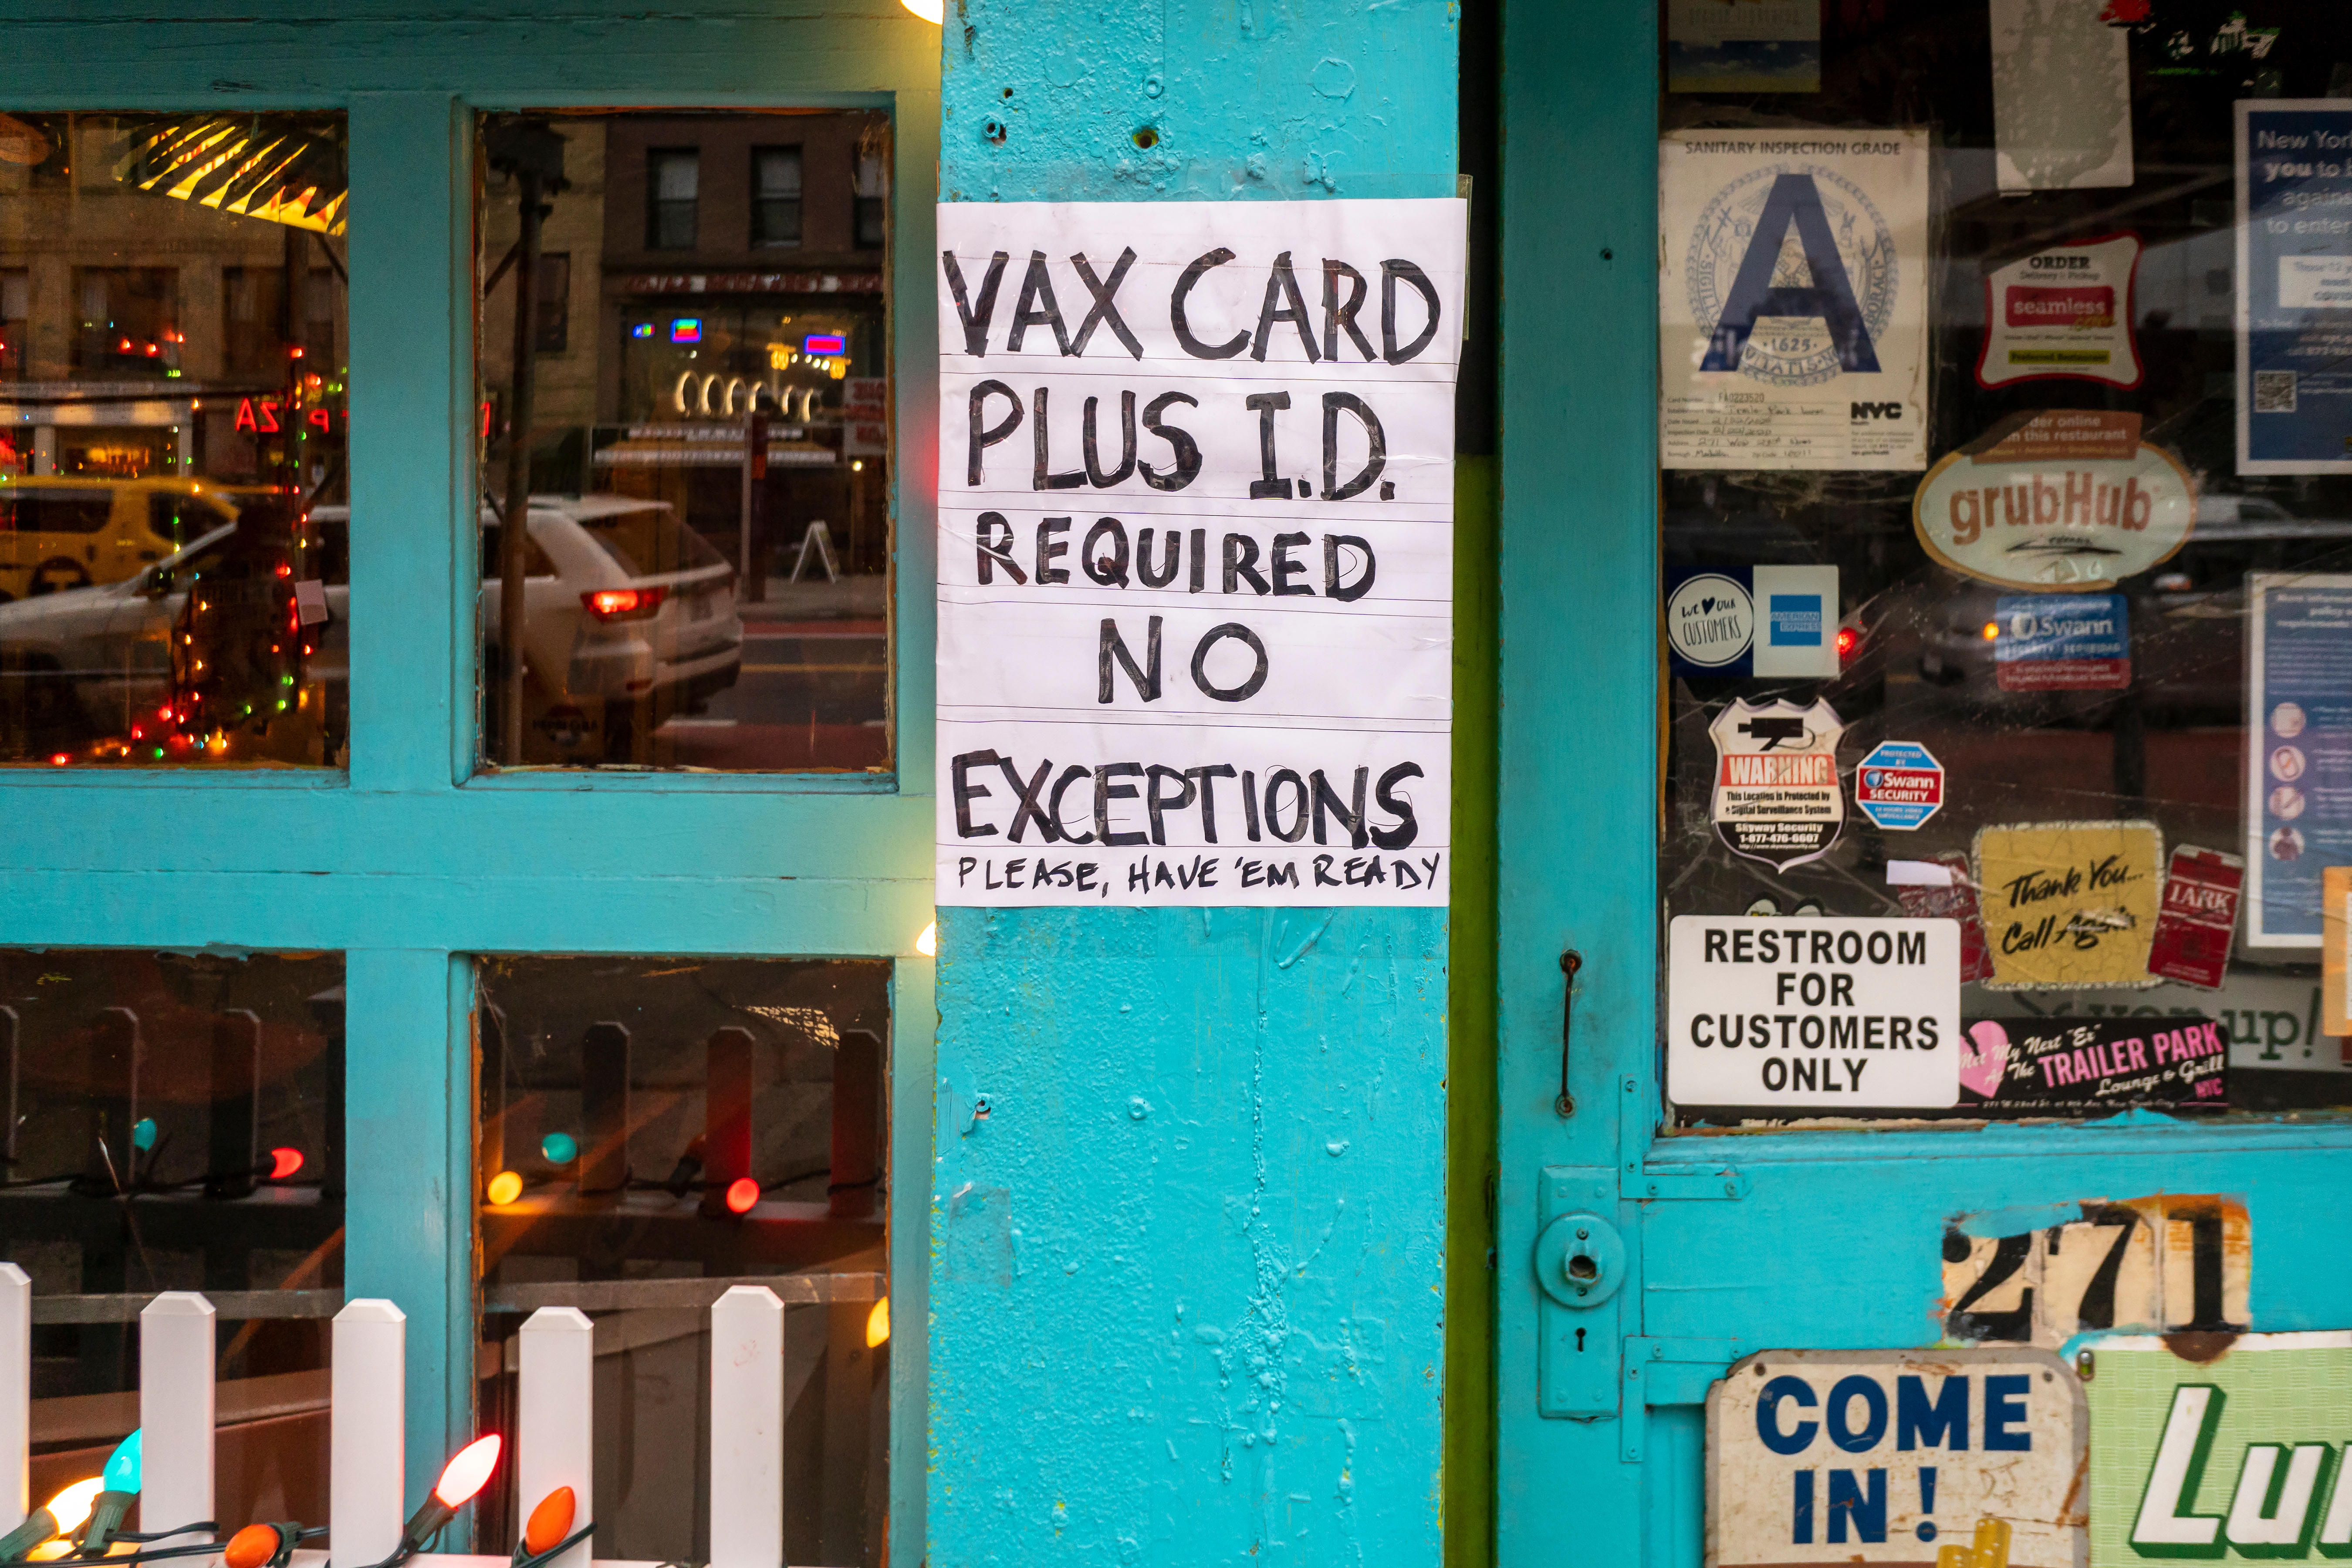 A hand-written sign outside a restaurant says “Vax card plus i.d. required. No exceptions, please have ‘em ready.”